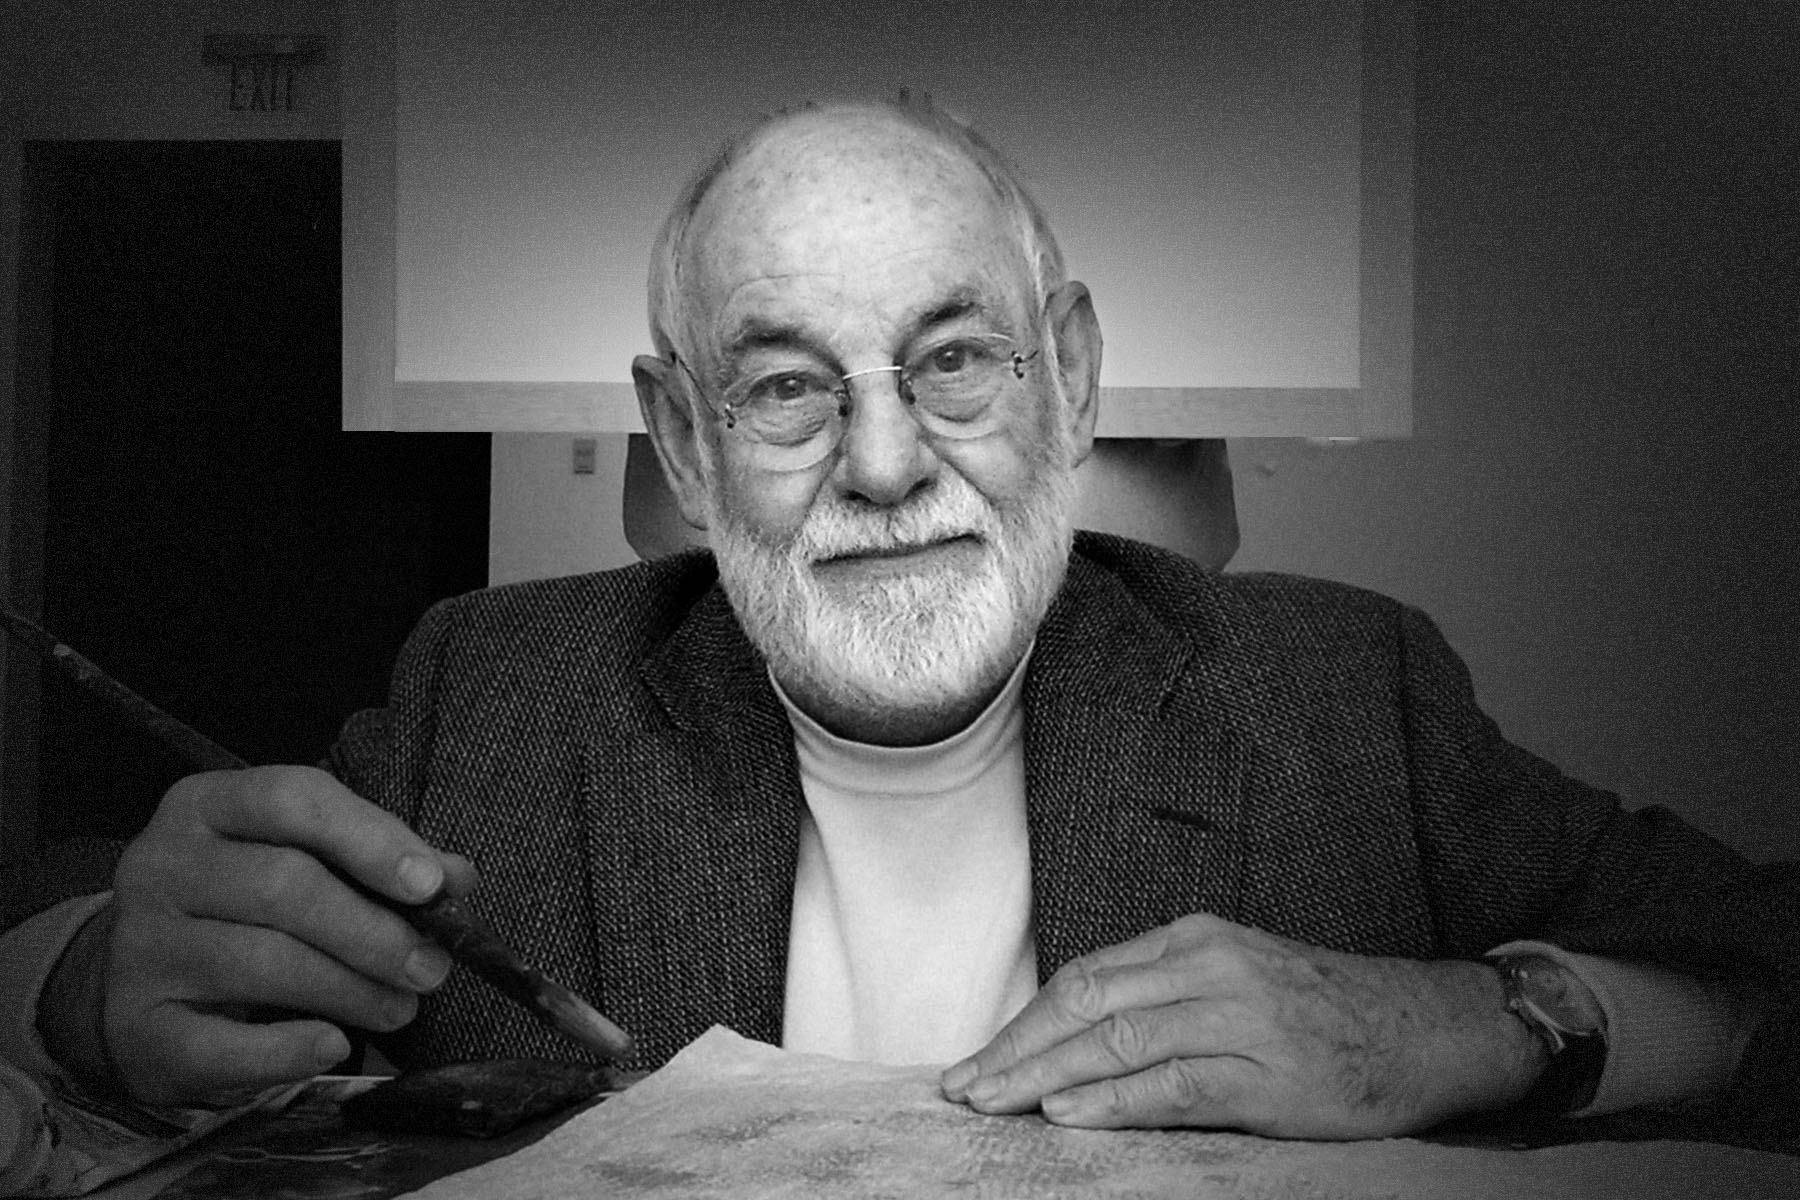 Eric Carle, author of The Very Hungry Caterpillar, dies aged 91